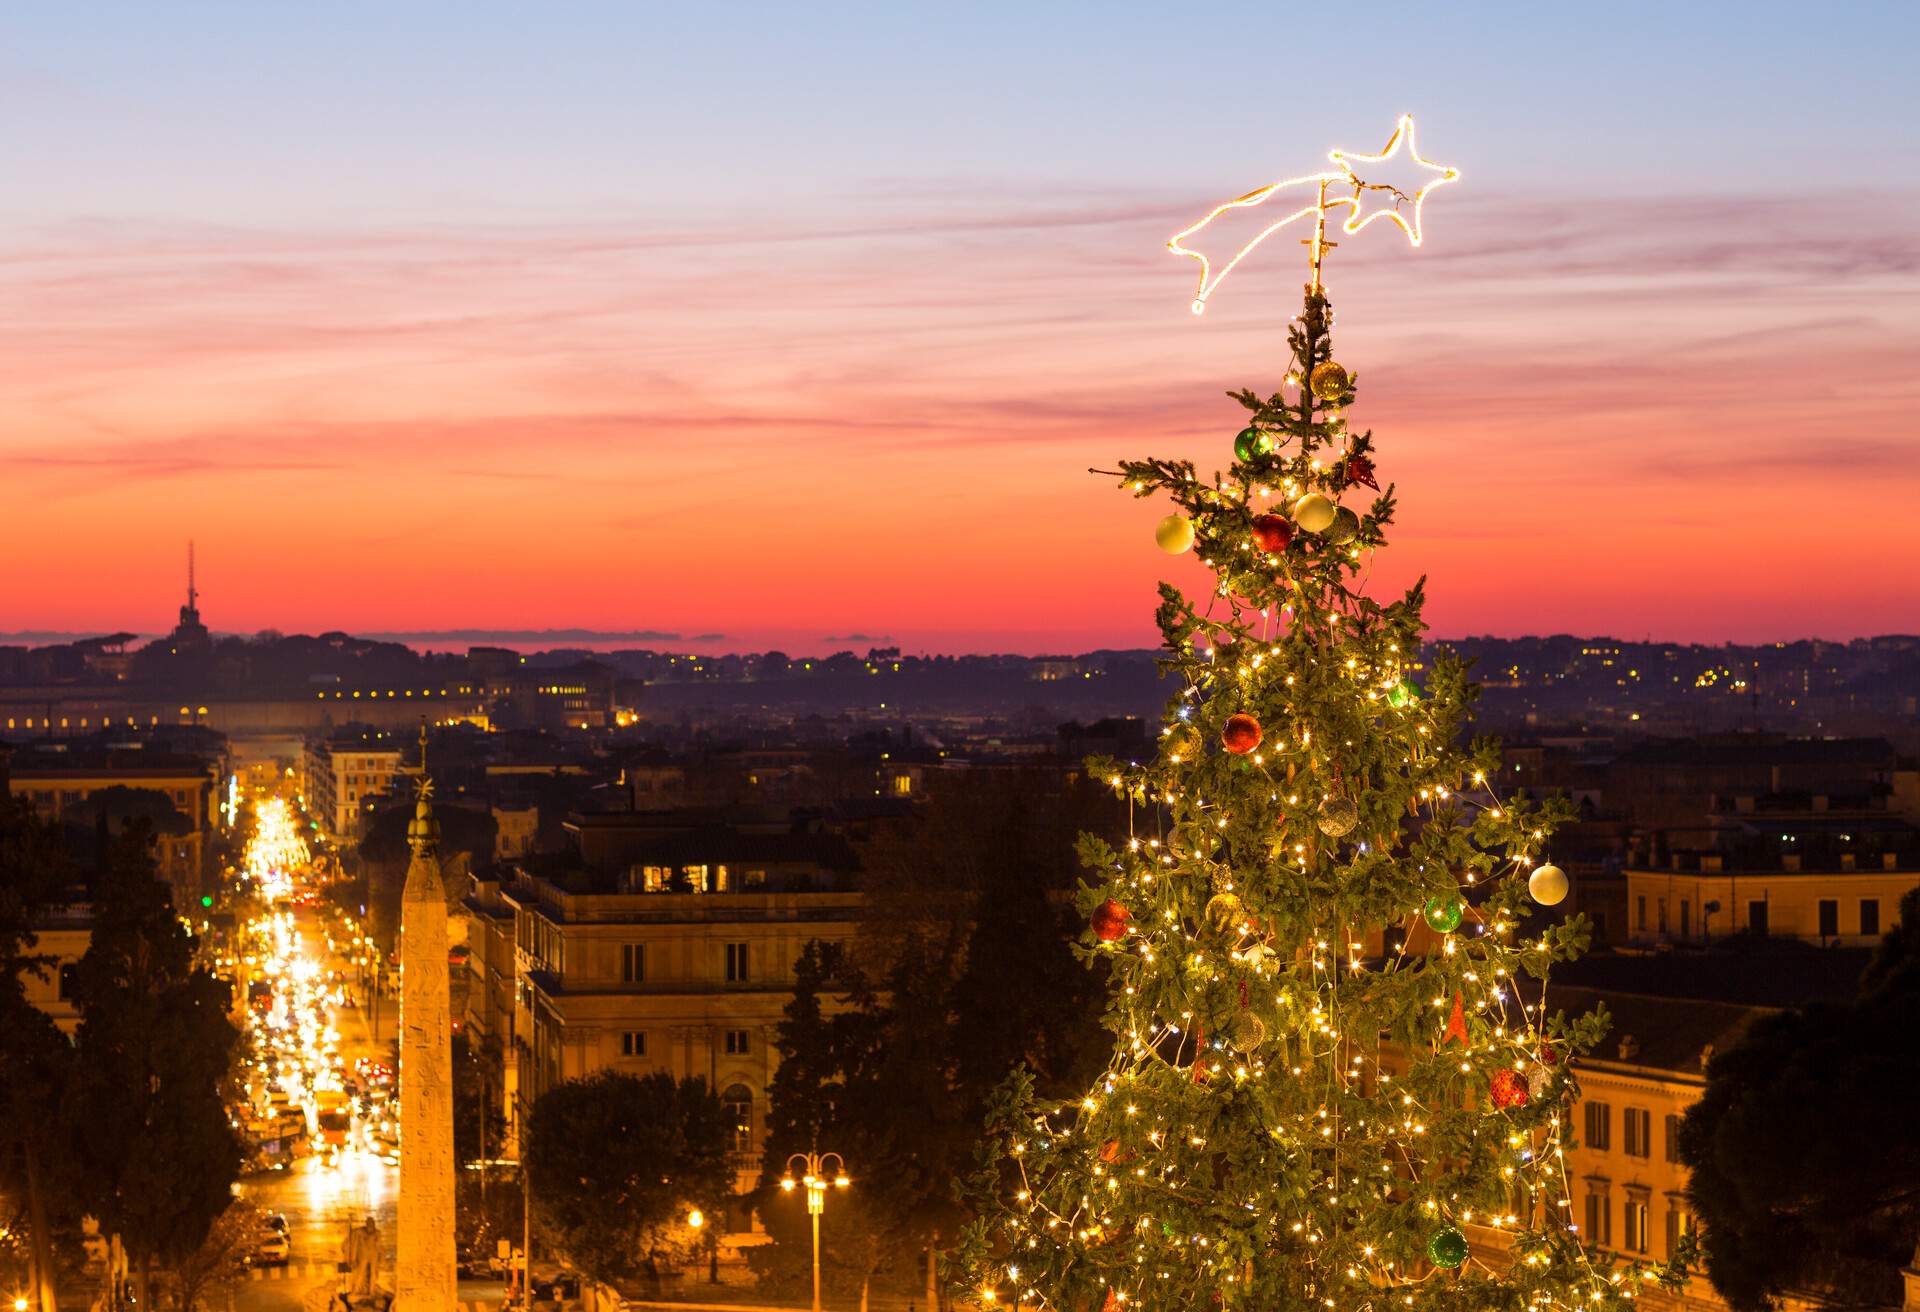 DEST_ITALY_ROME_CHRISTMAS_TREE_SUNSET_GettyImages